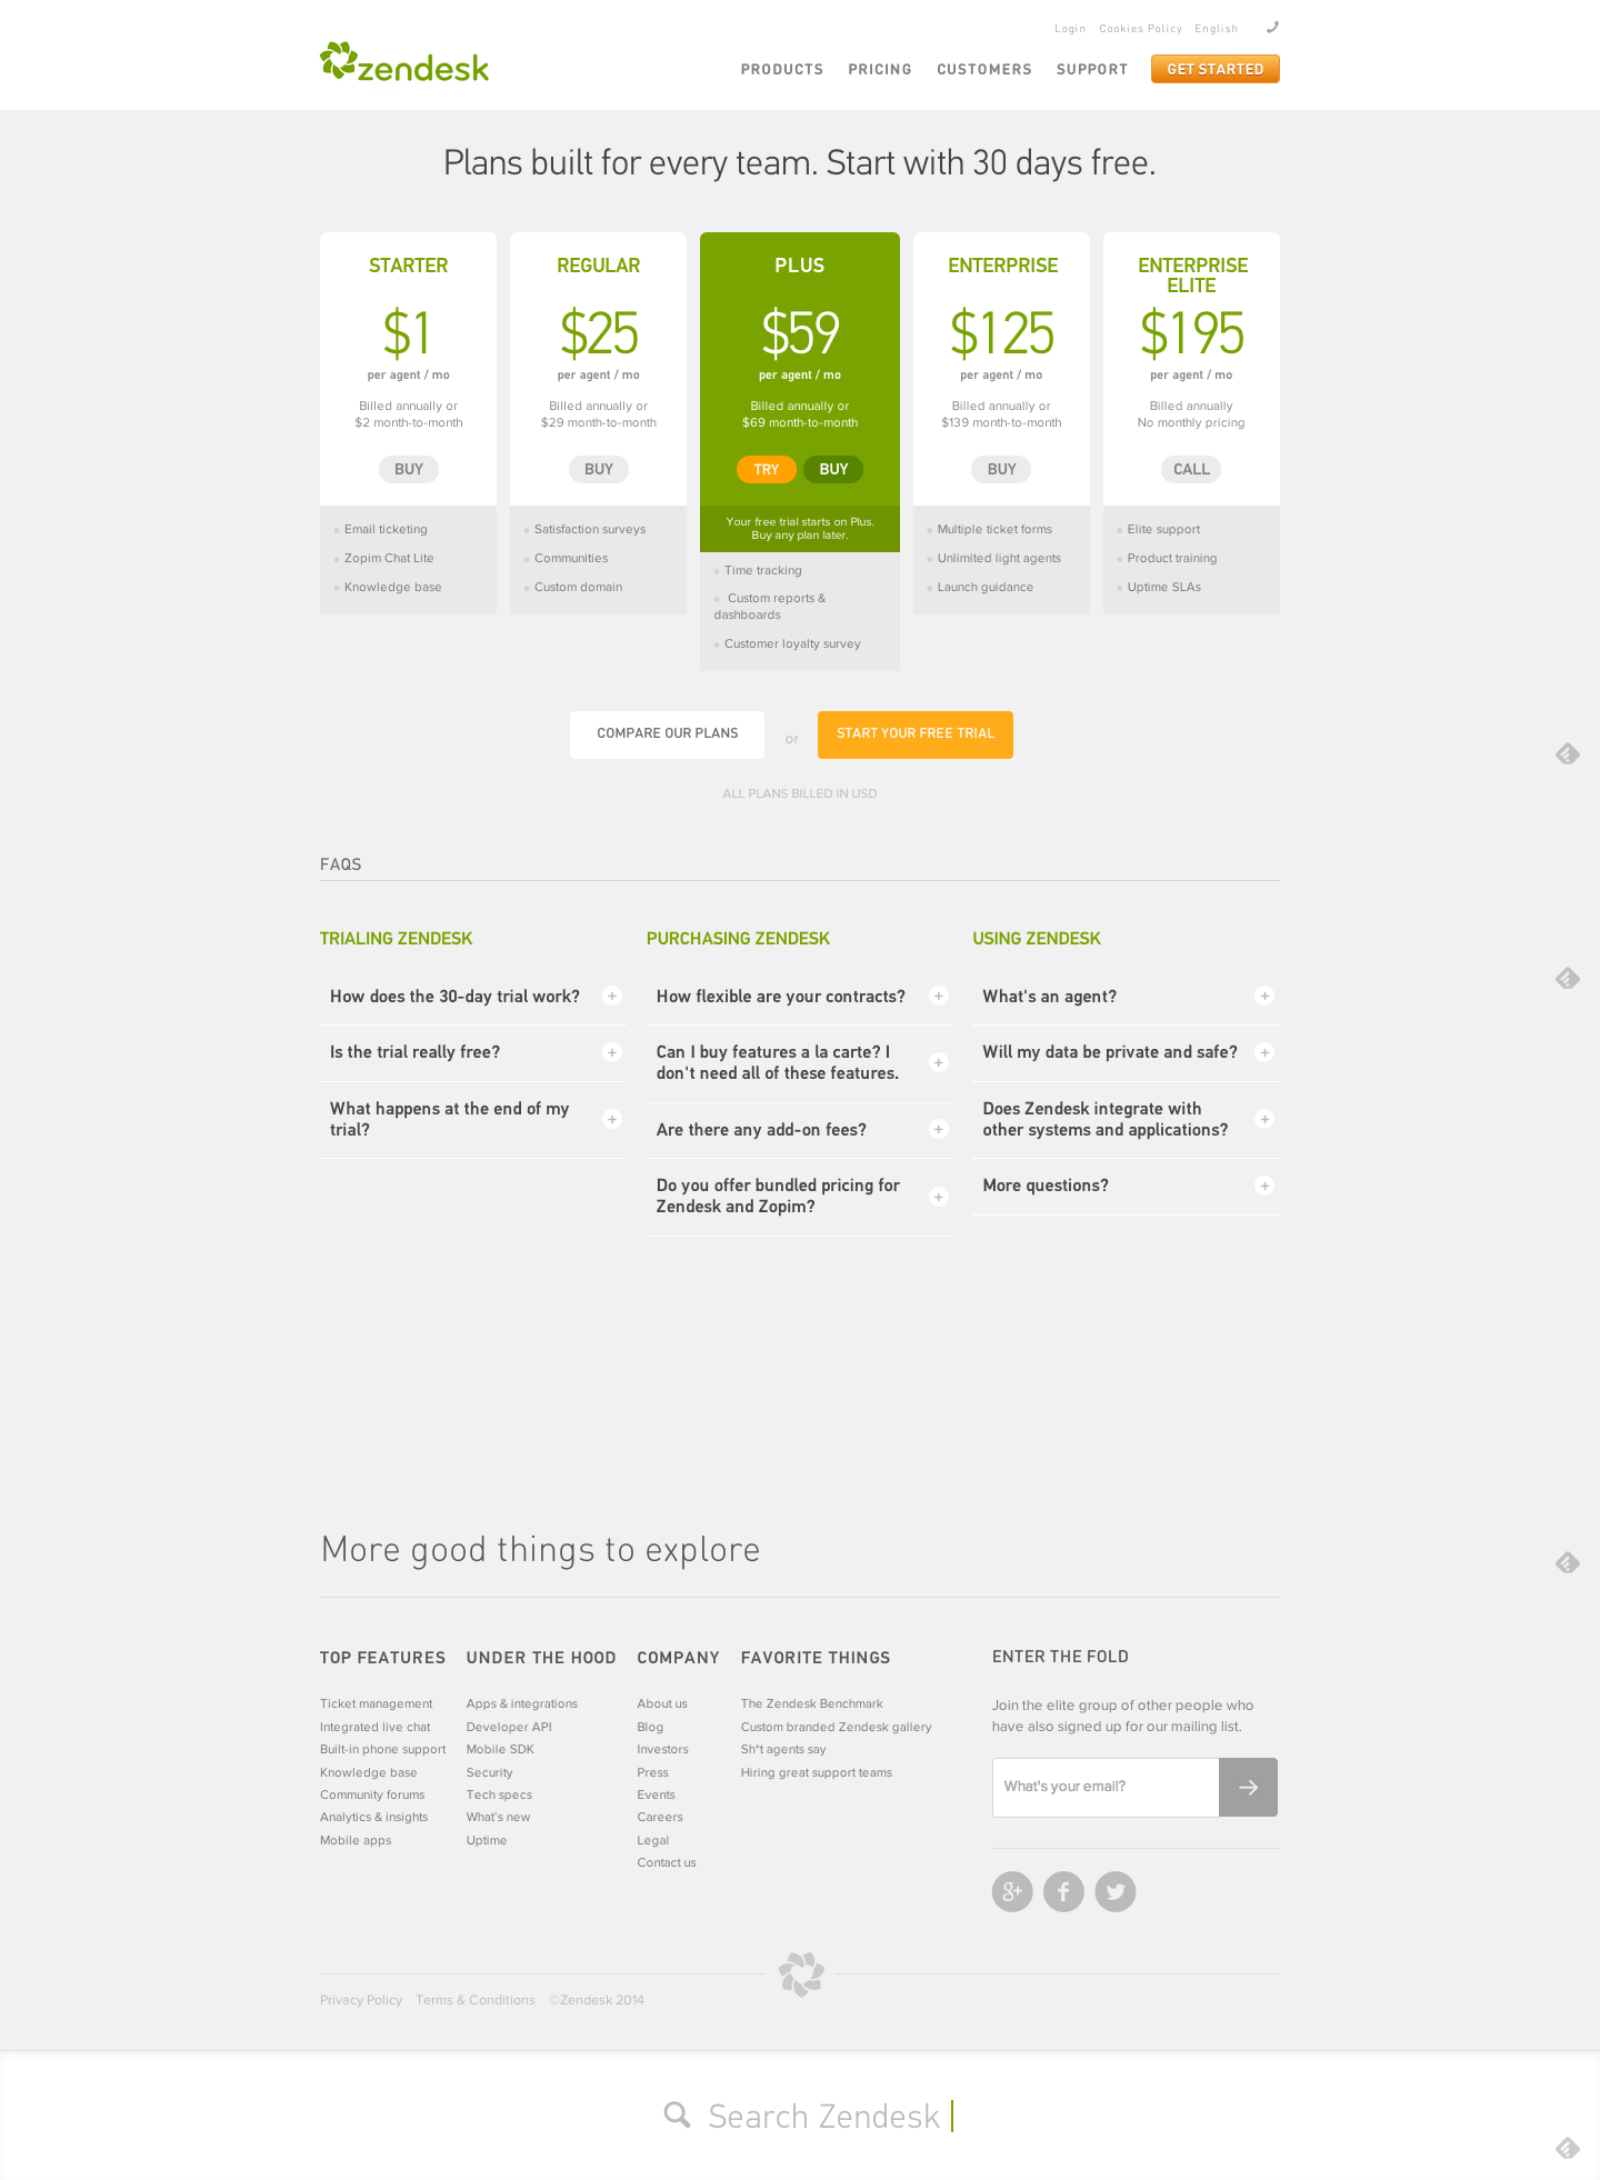 Zendesk pricing page